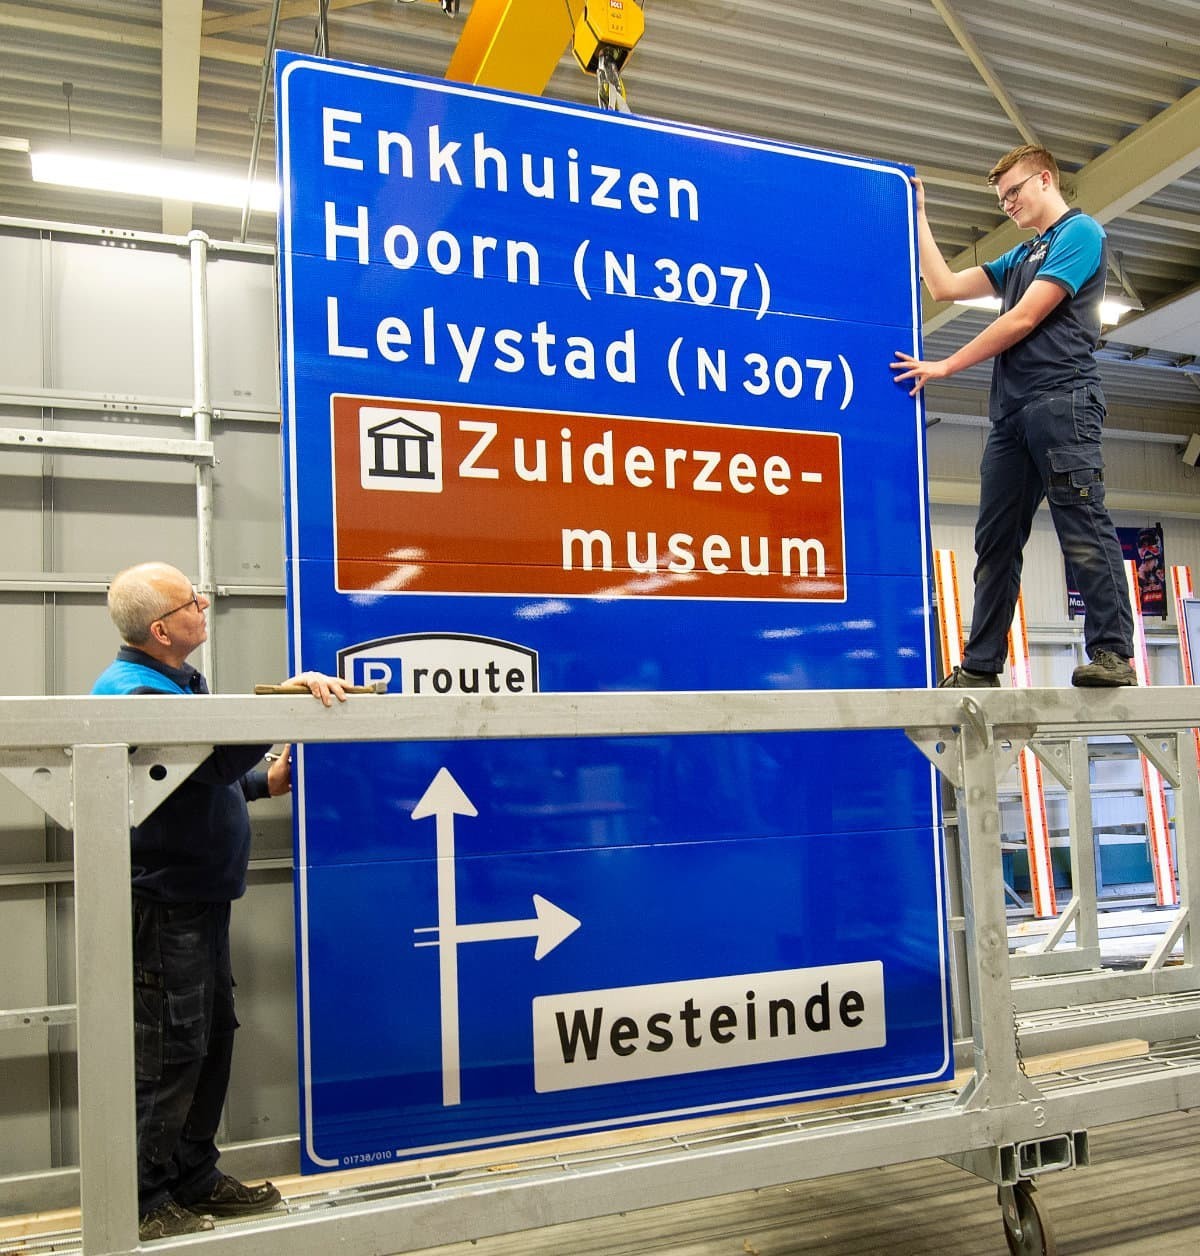 Brimos produces high-quality overhead guide signs with ease using the TrafficJet™ Pro